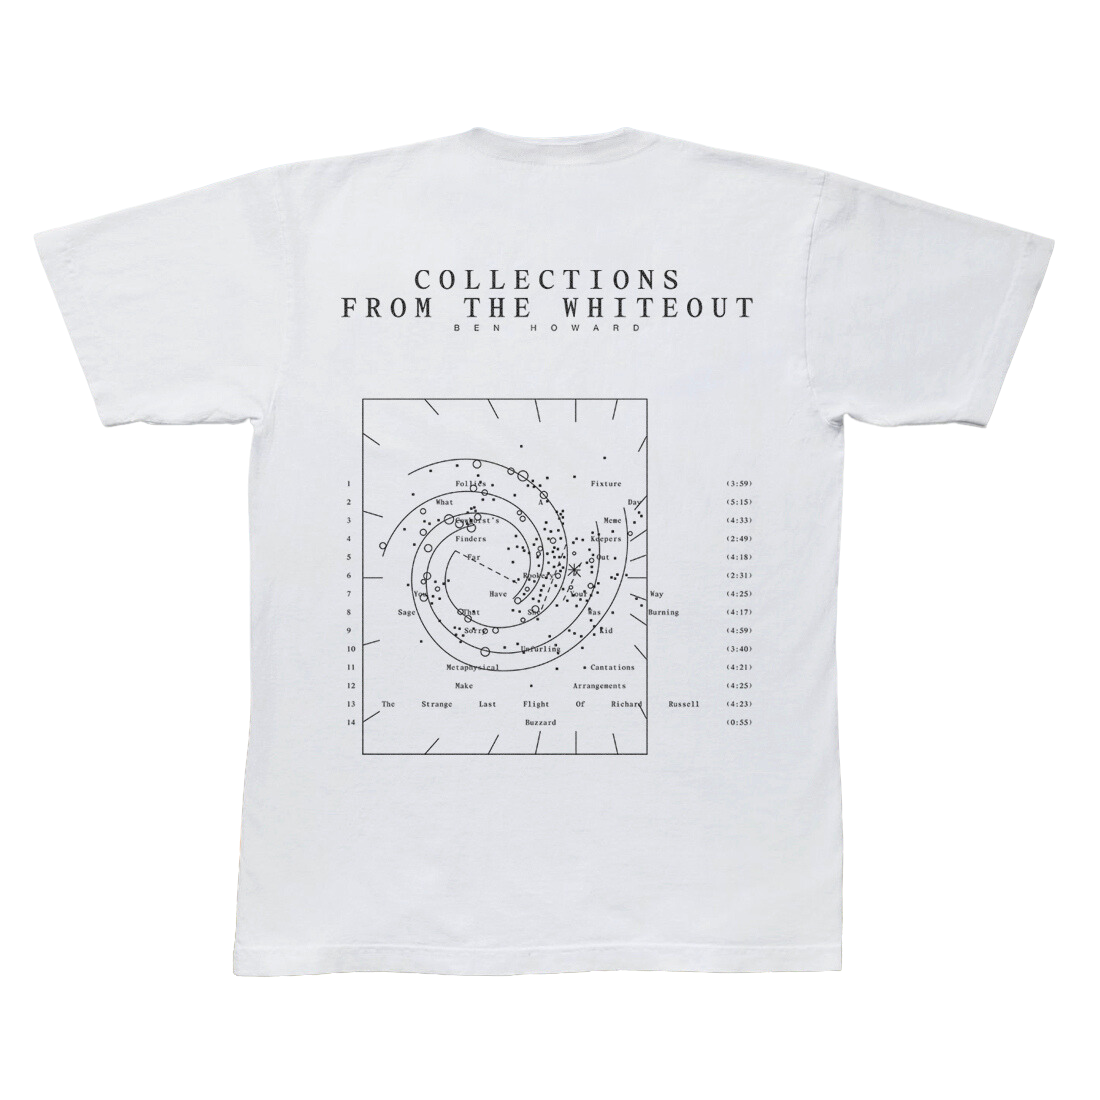 Ben Howard - Collections From The Whiteout: Spiral Tee (White)